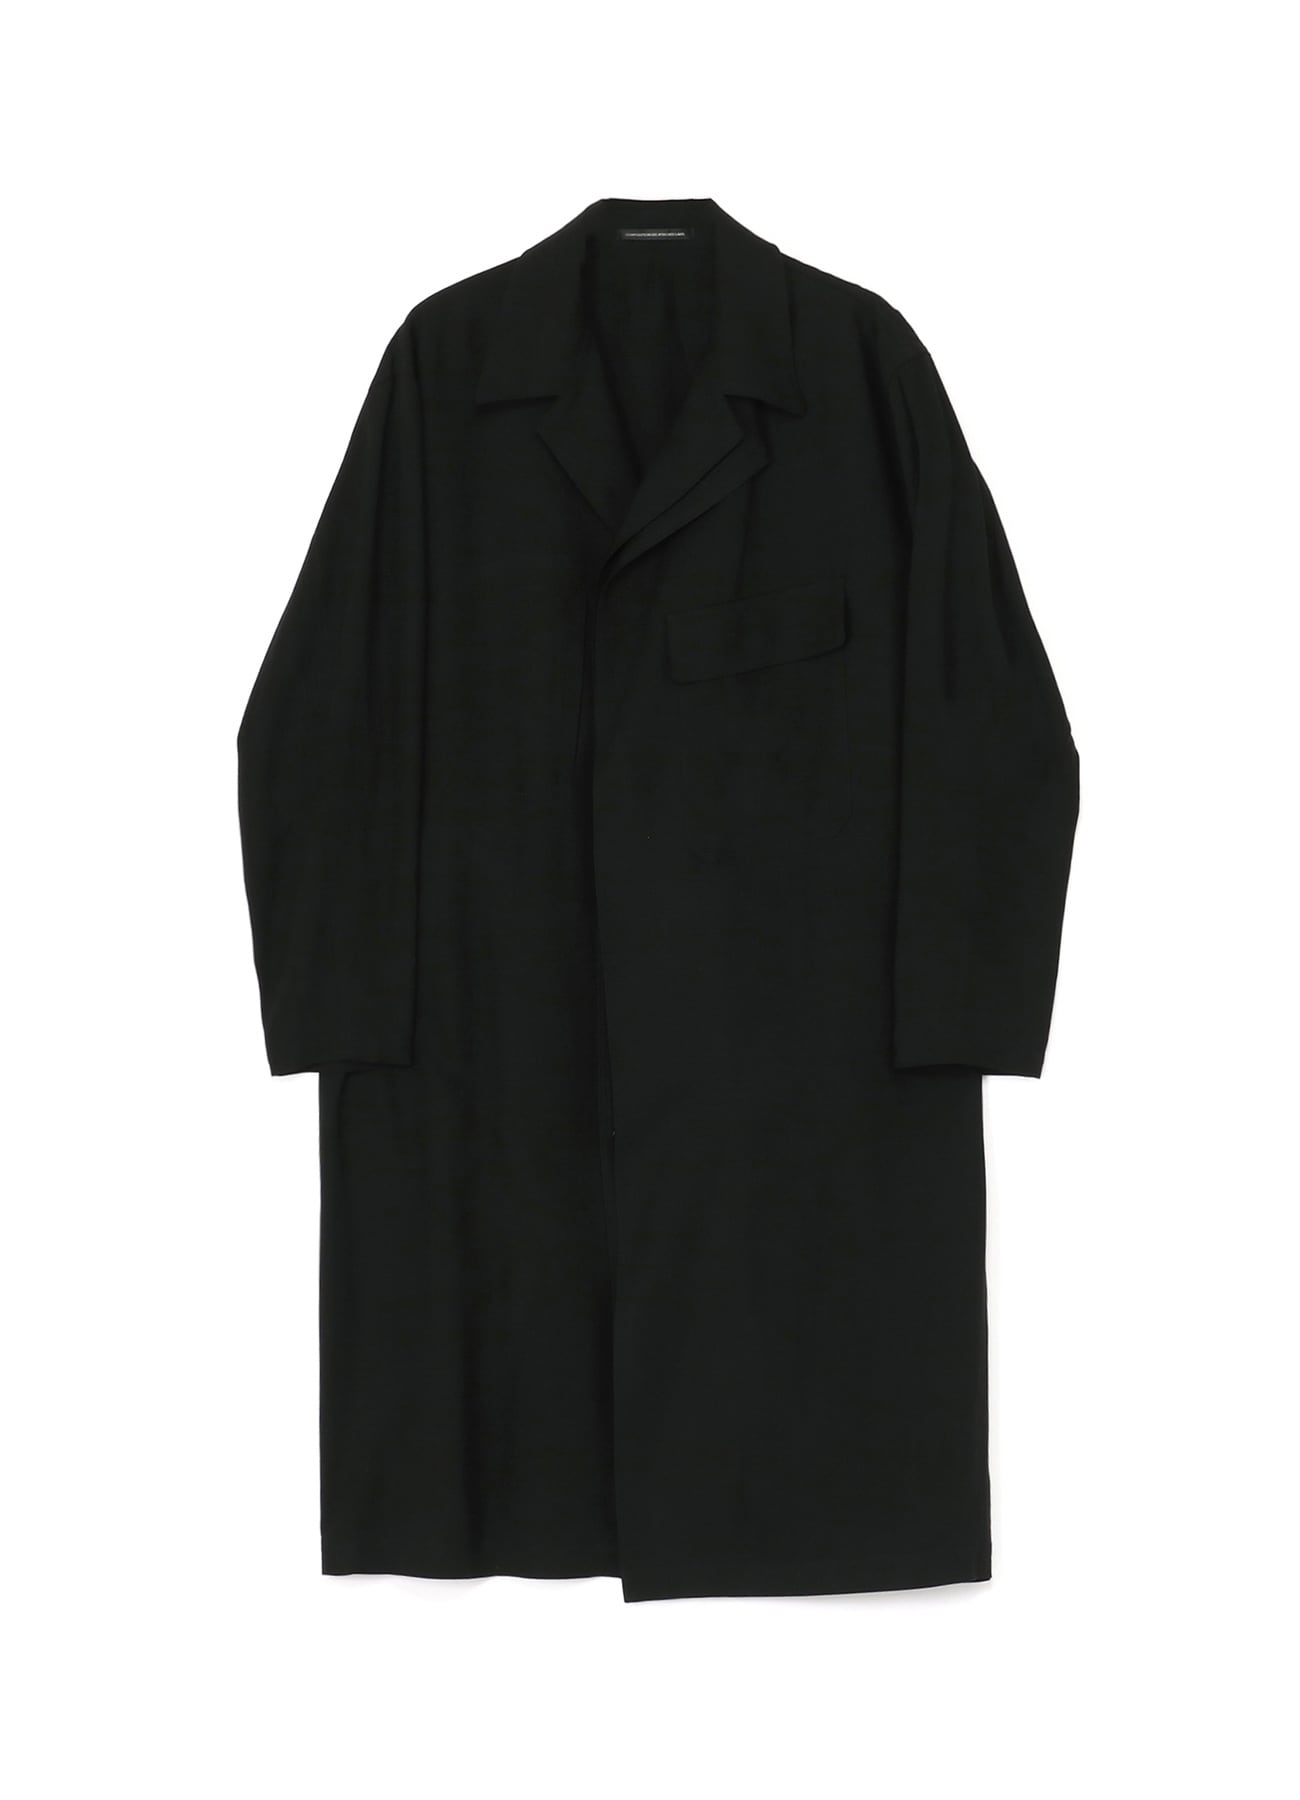 RAYON LINEN LEFT FRONT DOUBLE LAYERED COAT(XS Black): Y's｜THE 